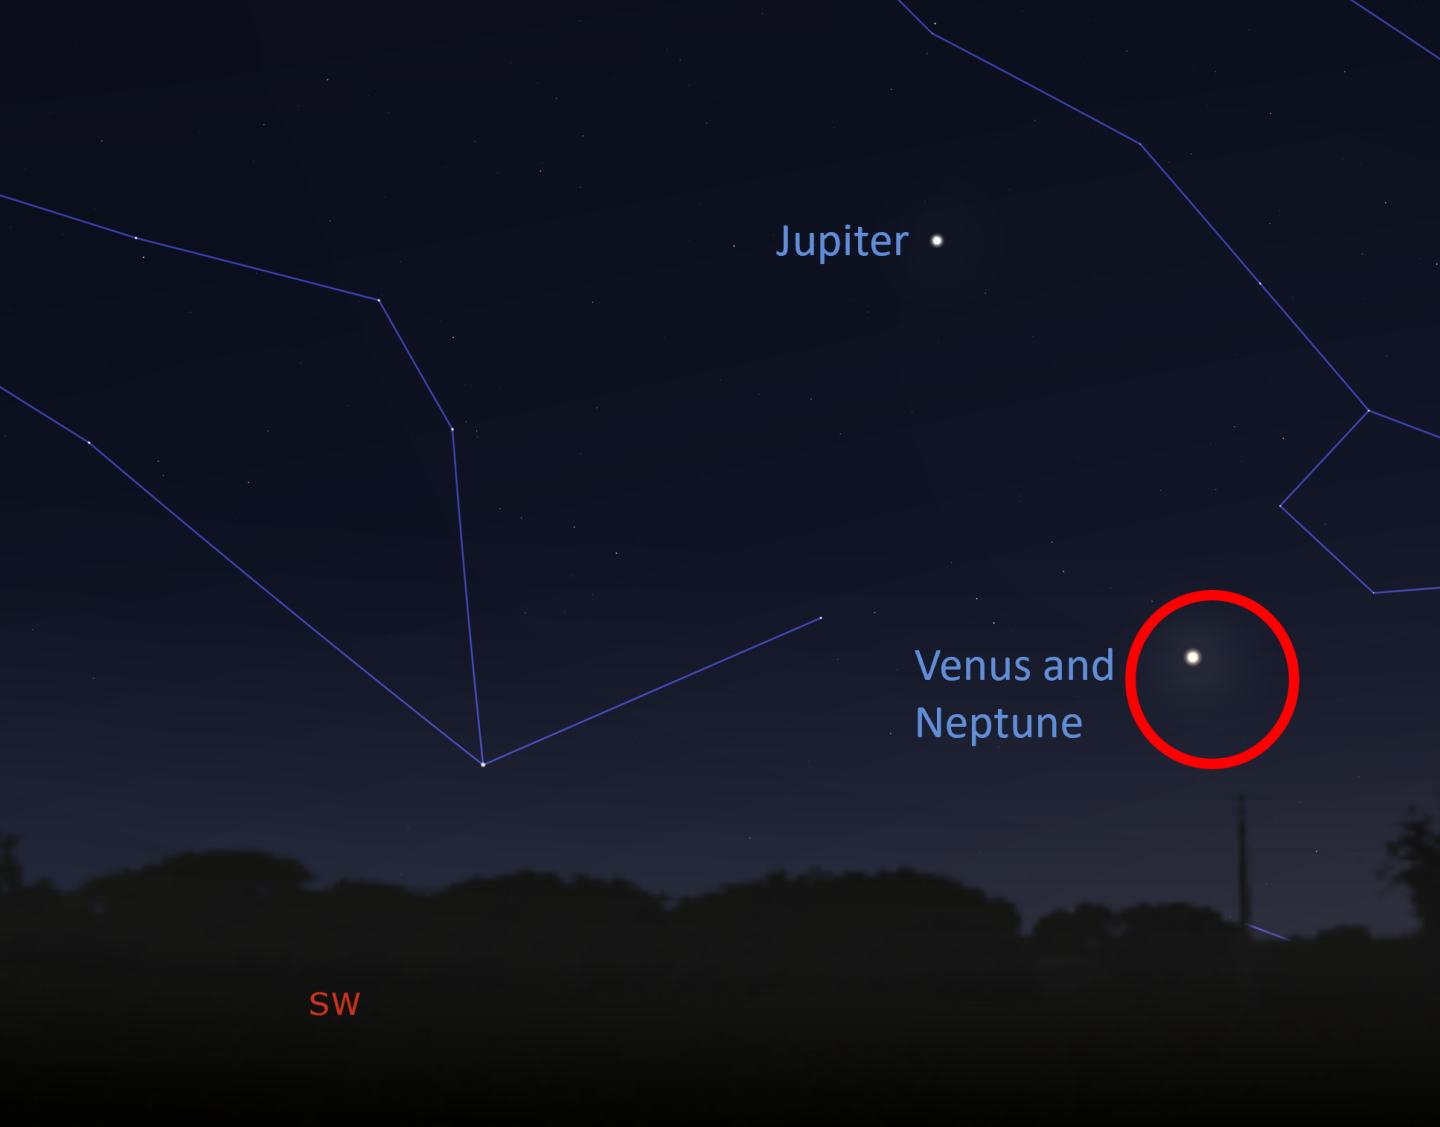 Venus and Neptune are circled in the south western sky.